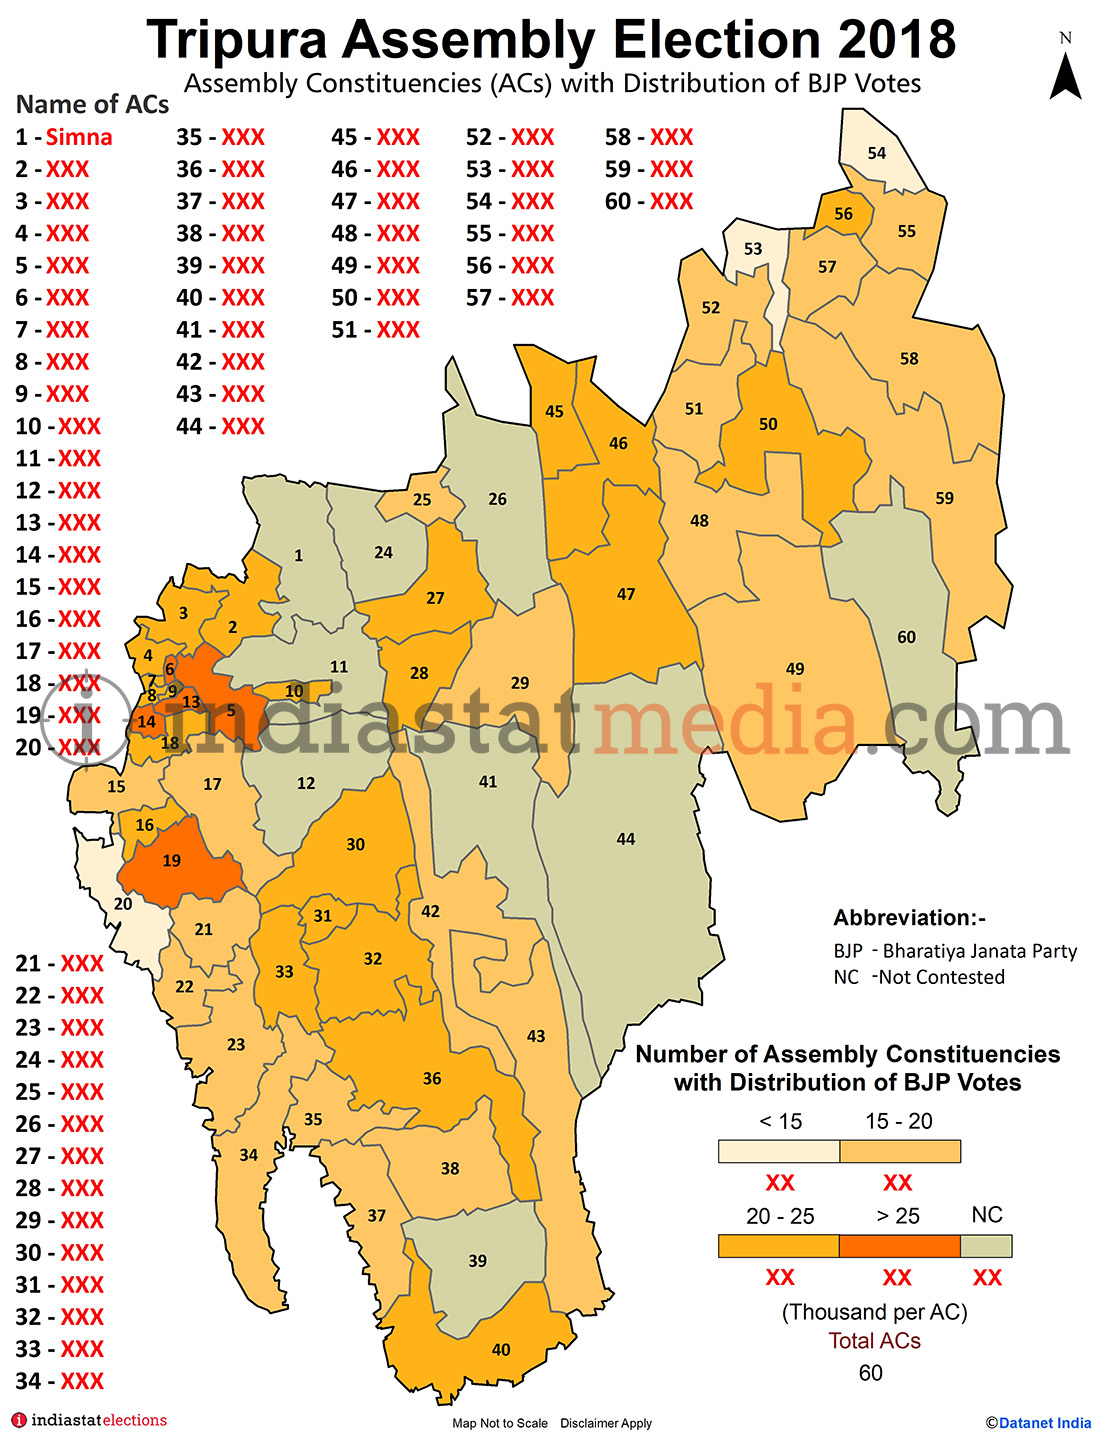 Distribution of BJP Votes by Constituencies in Tripura (Assembly Election - 2018)